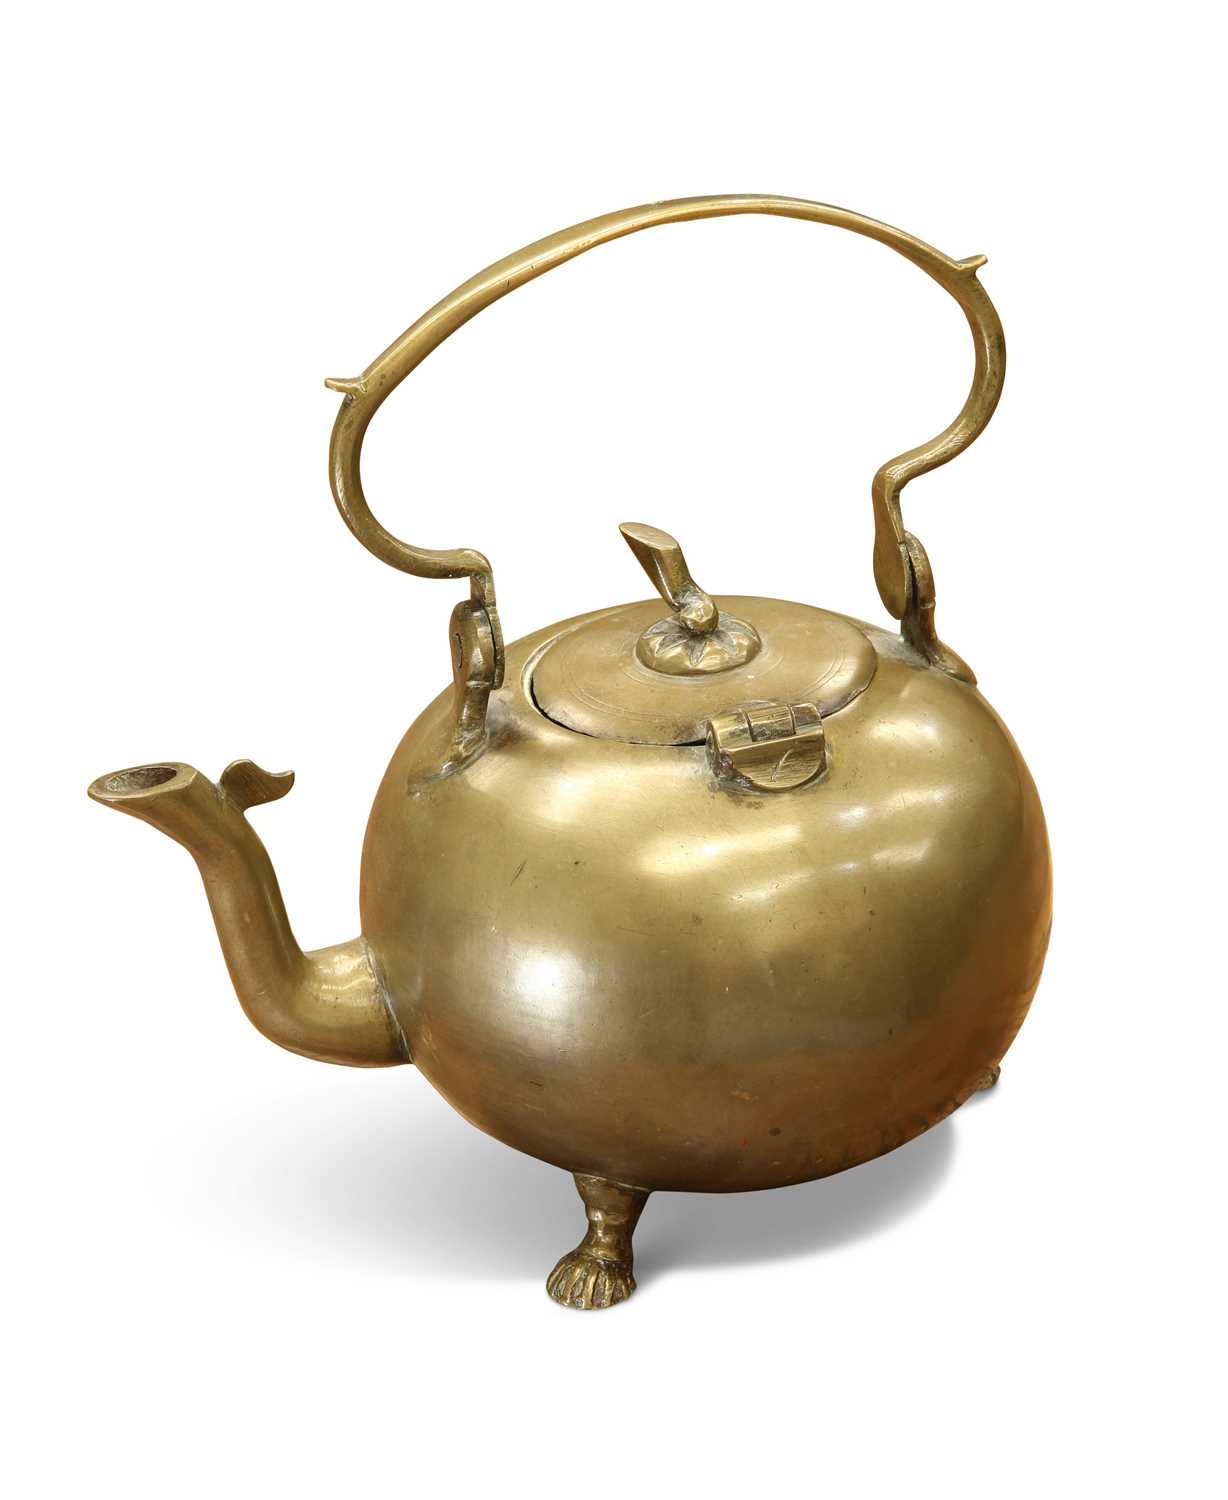 A 19TH CENTURY BRASS MELON-SHAPED KETTLE - Image 2 of 2